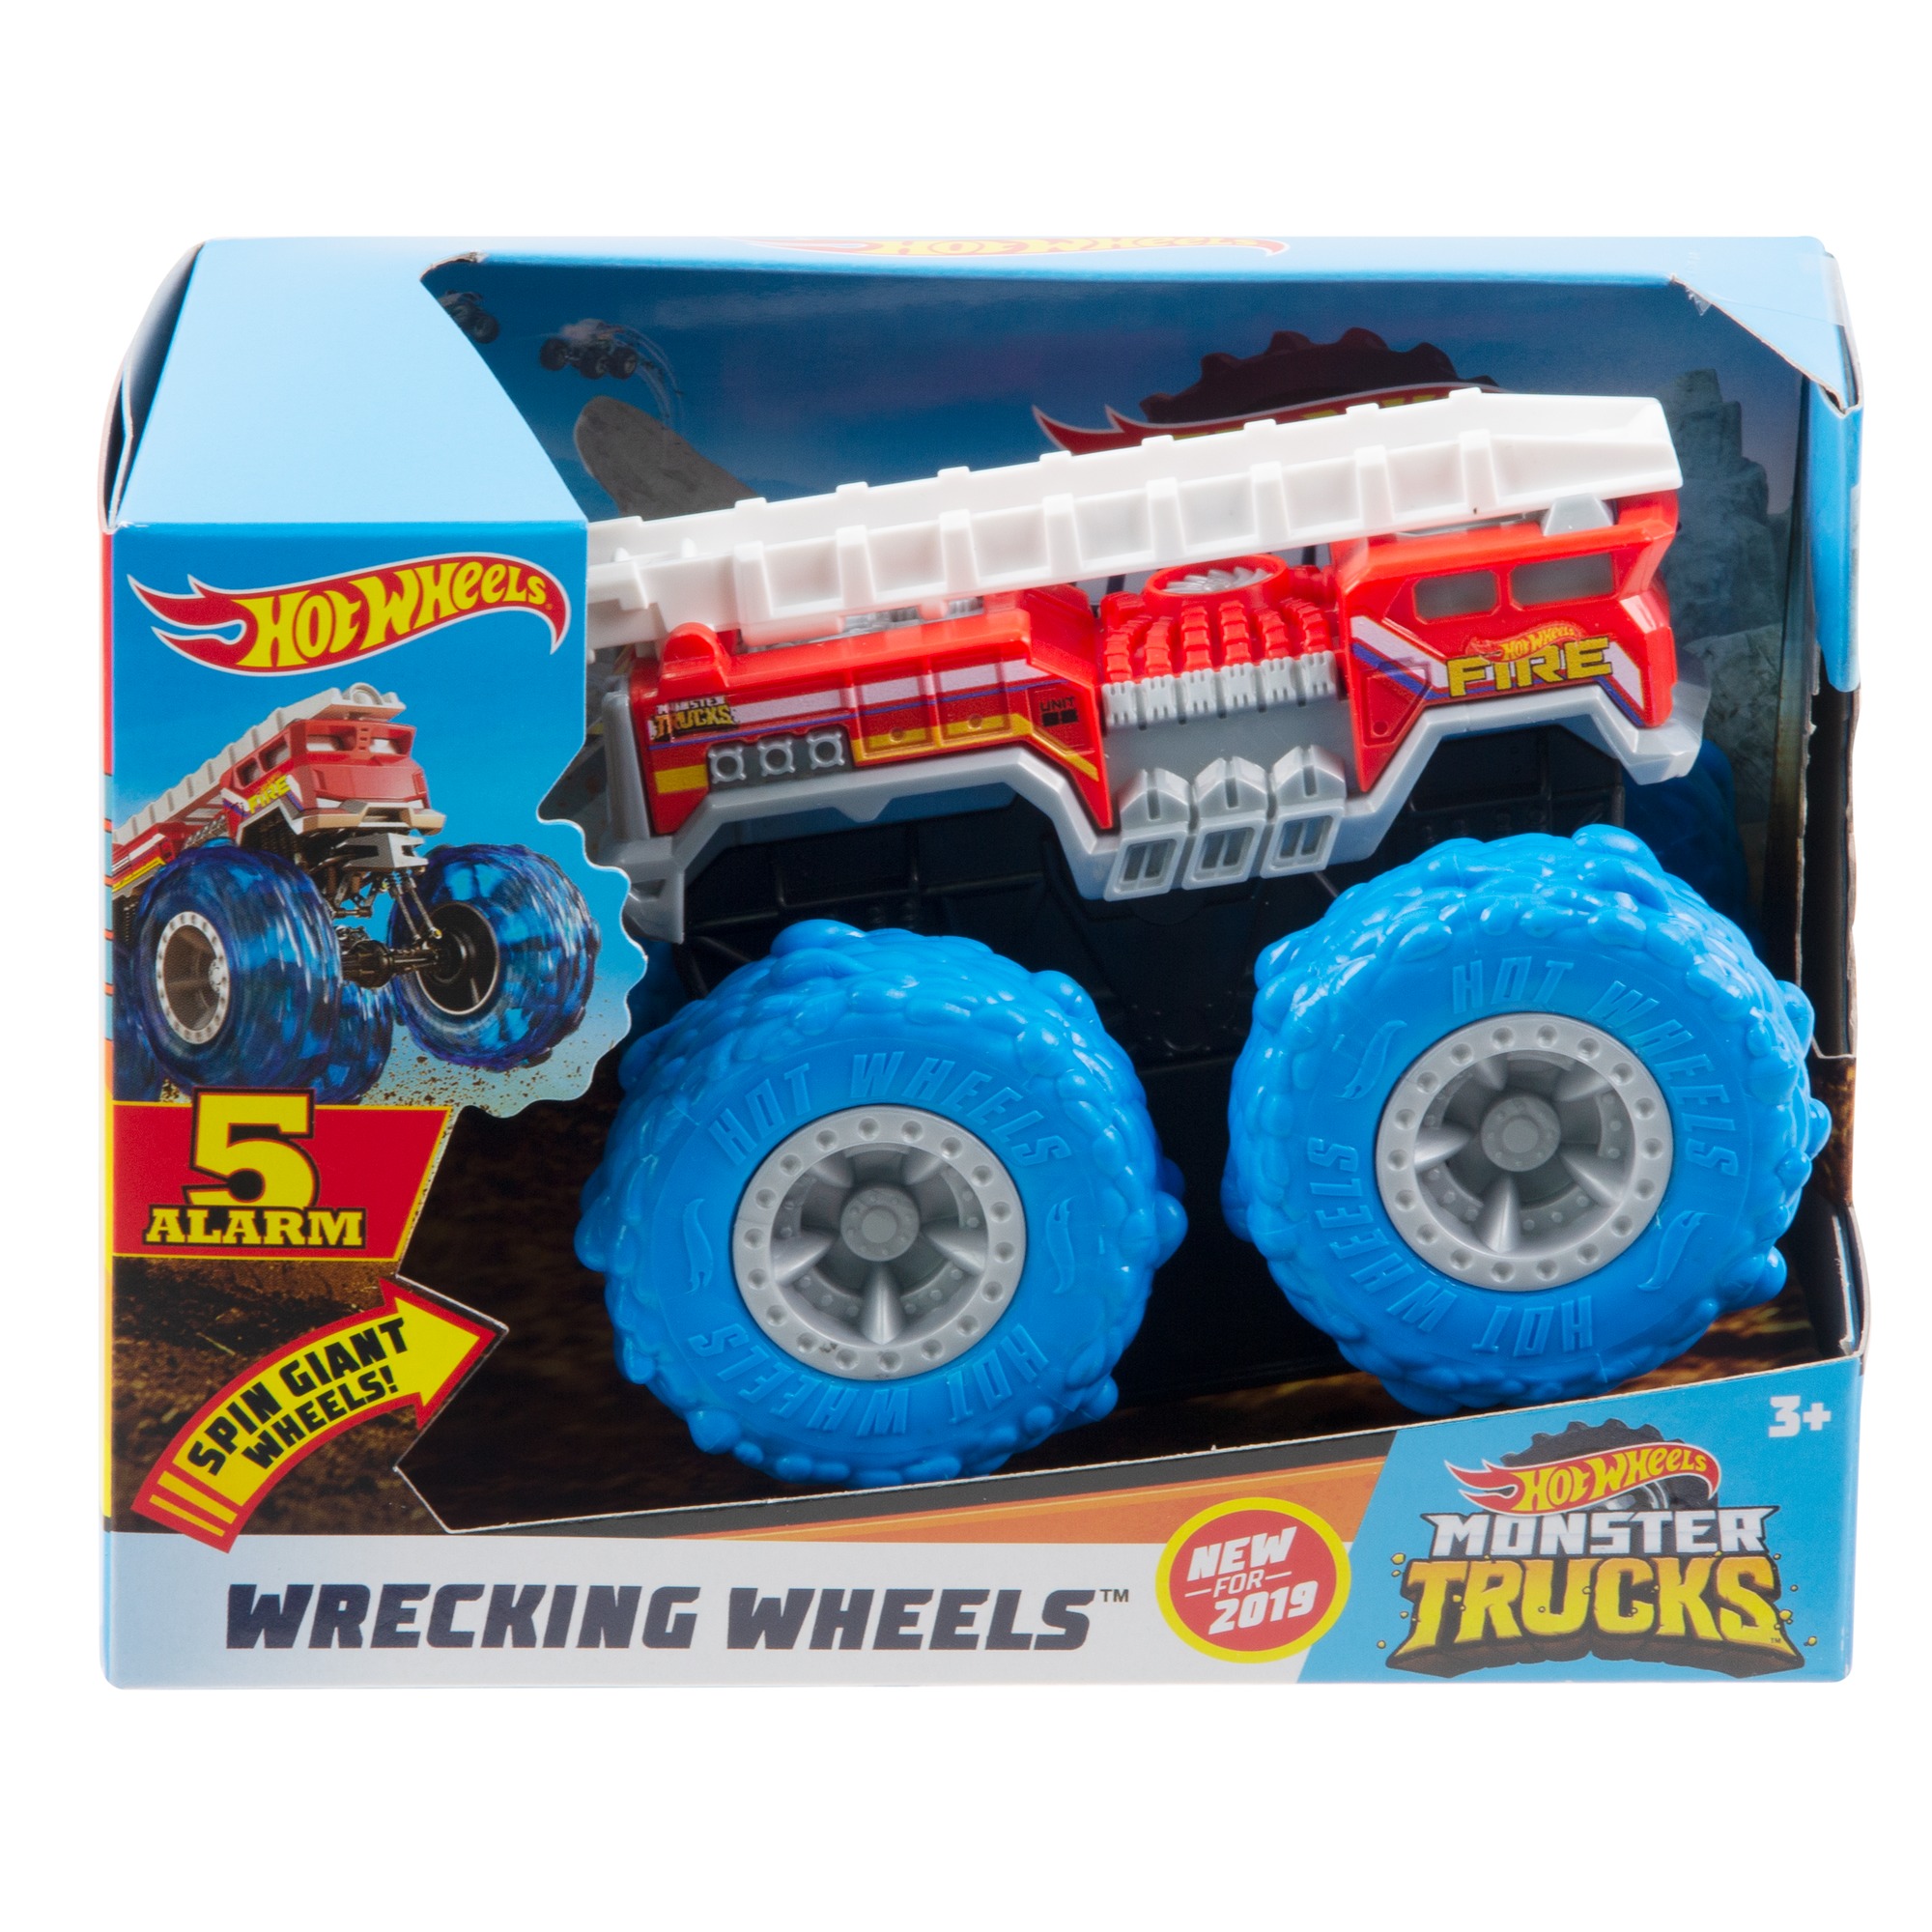 Monster Trucks By Hot Wheels 1:43 Scale Vehicle (Styles May Vary) - image 8 of 9